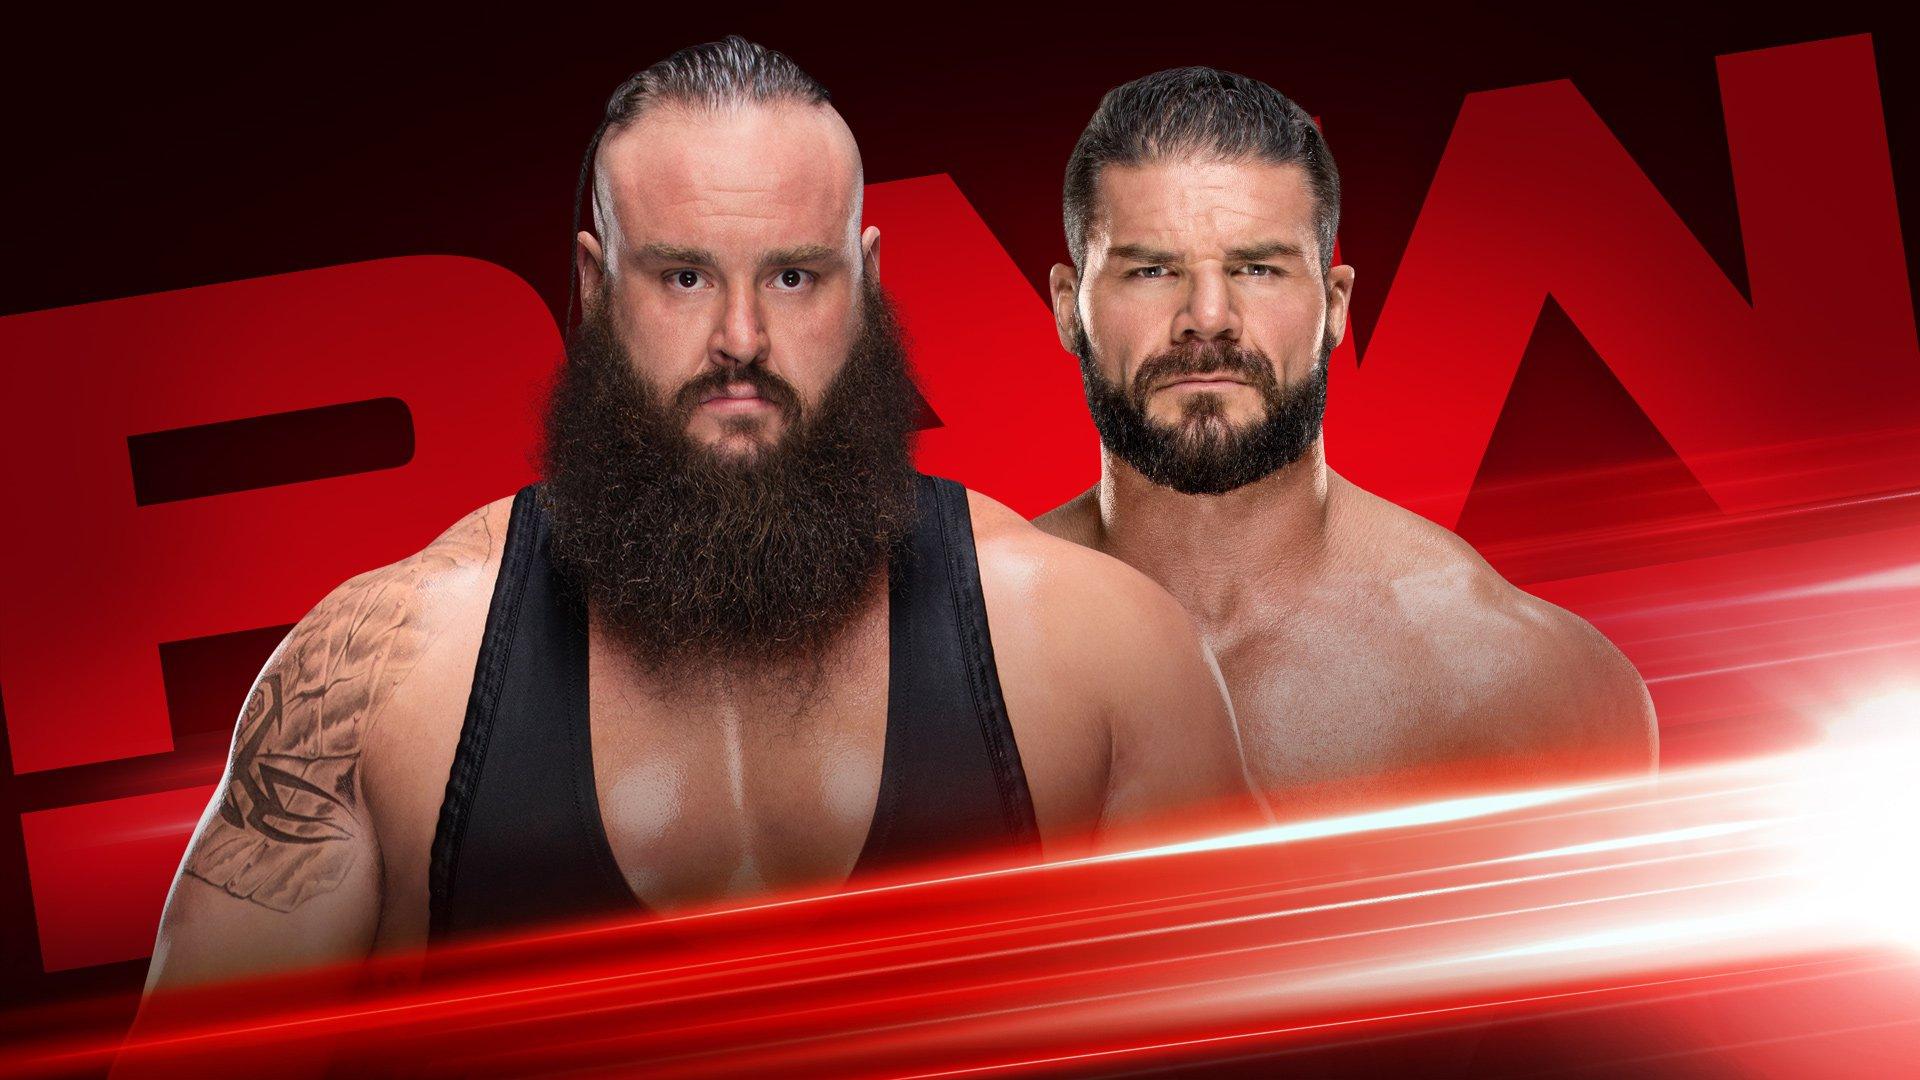 What You Can Expect To See On Tonight's Episode Of WWE RAW From Houston